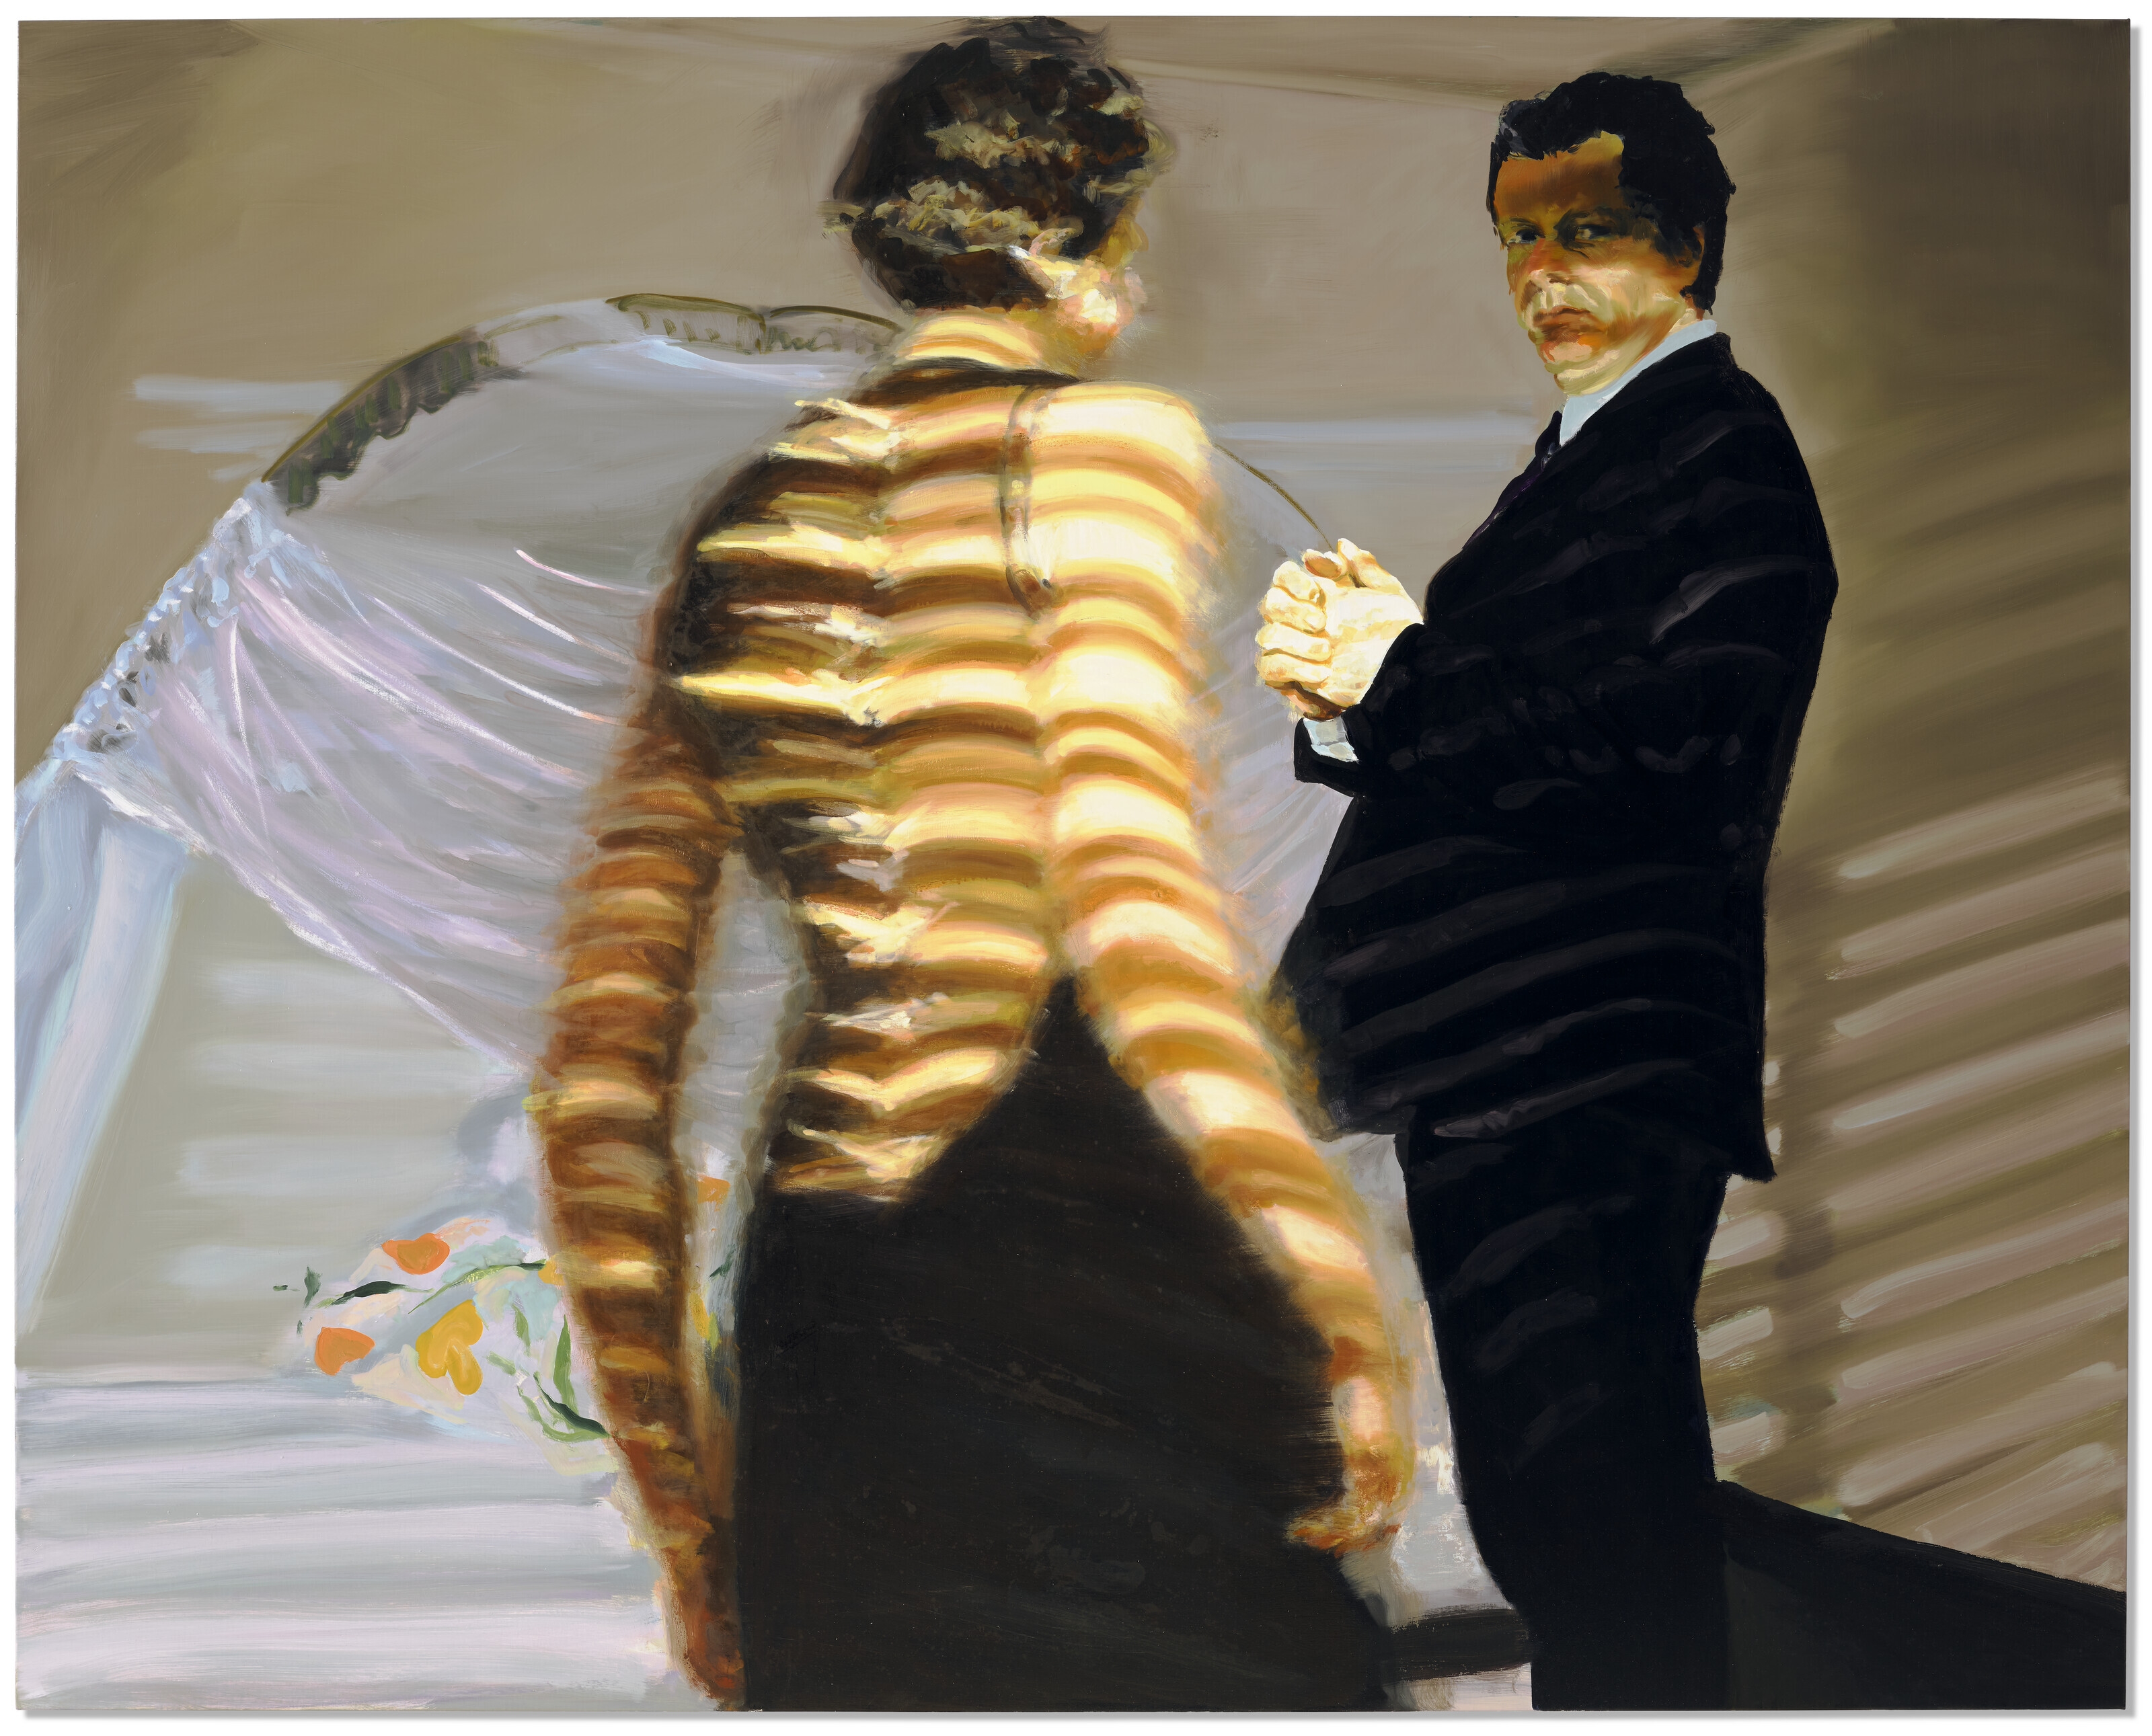 Artwork by Eric Fischl, Bedroom Scene #6 (Surviving the Fall Meant Using You for Handholds), Made of oil on linen